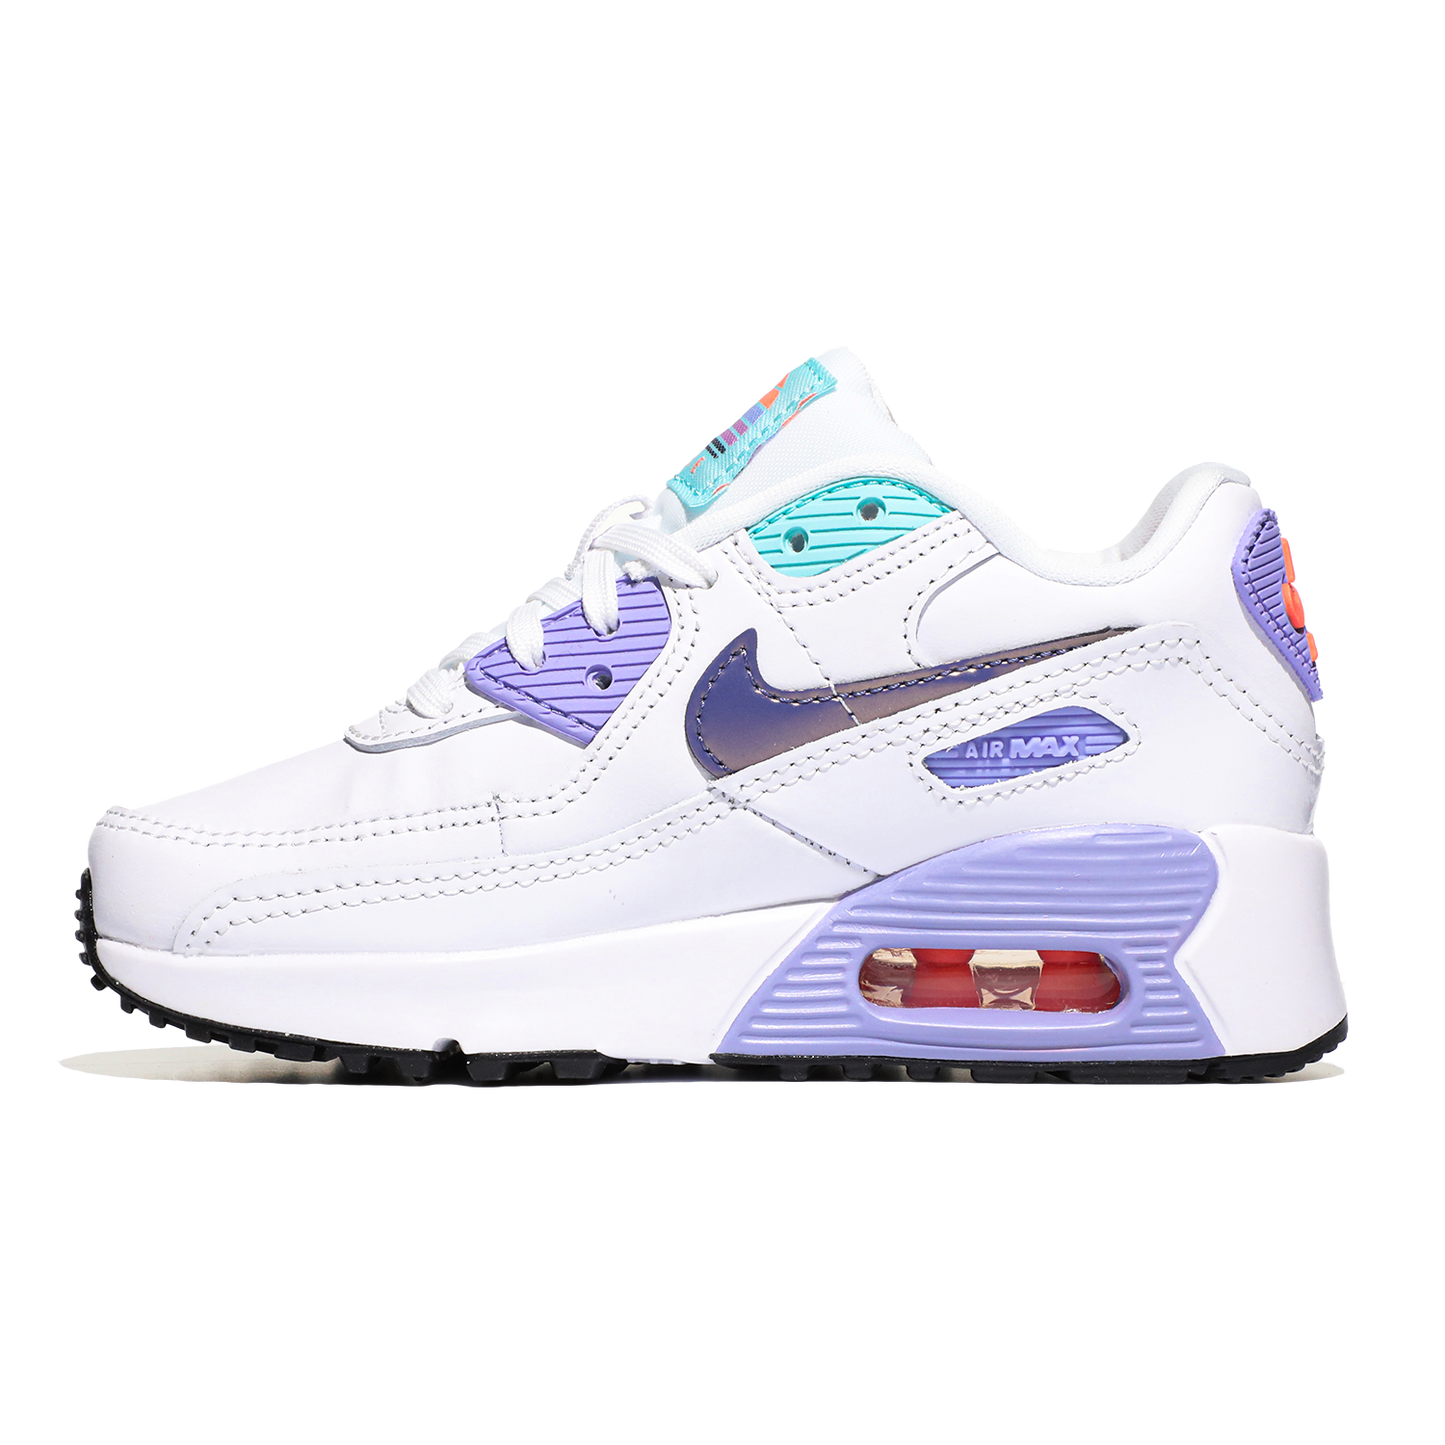 Image 6 of Air Max 90 LTR SE 2 (Little Kid)